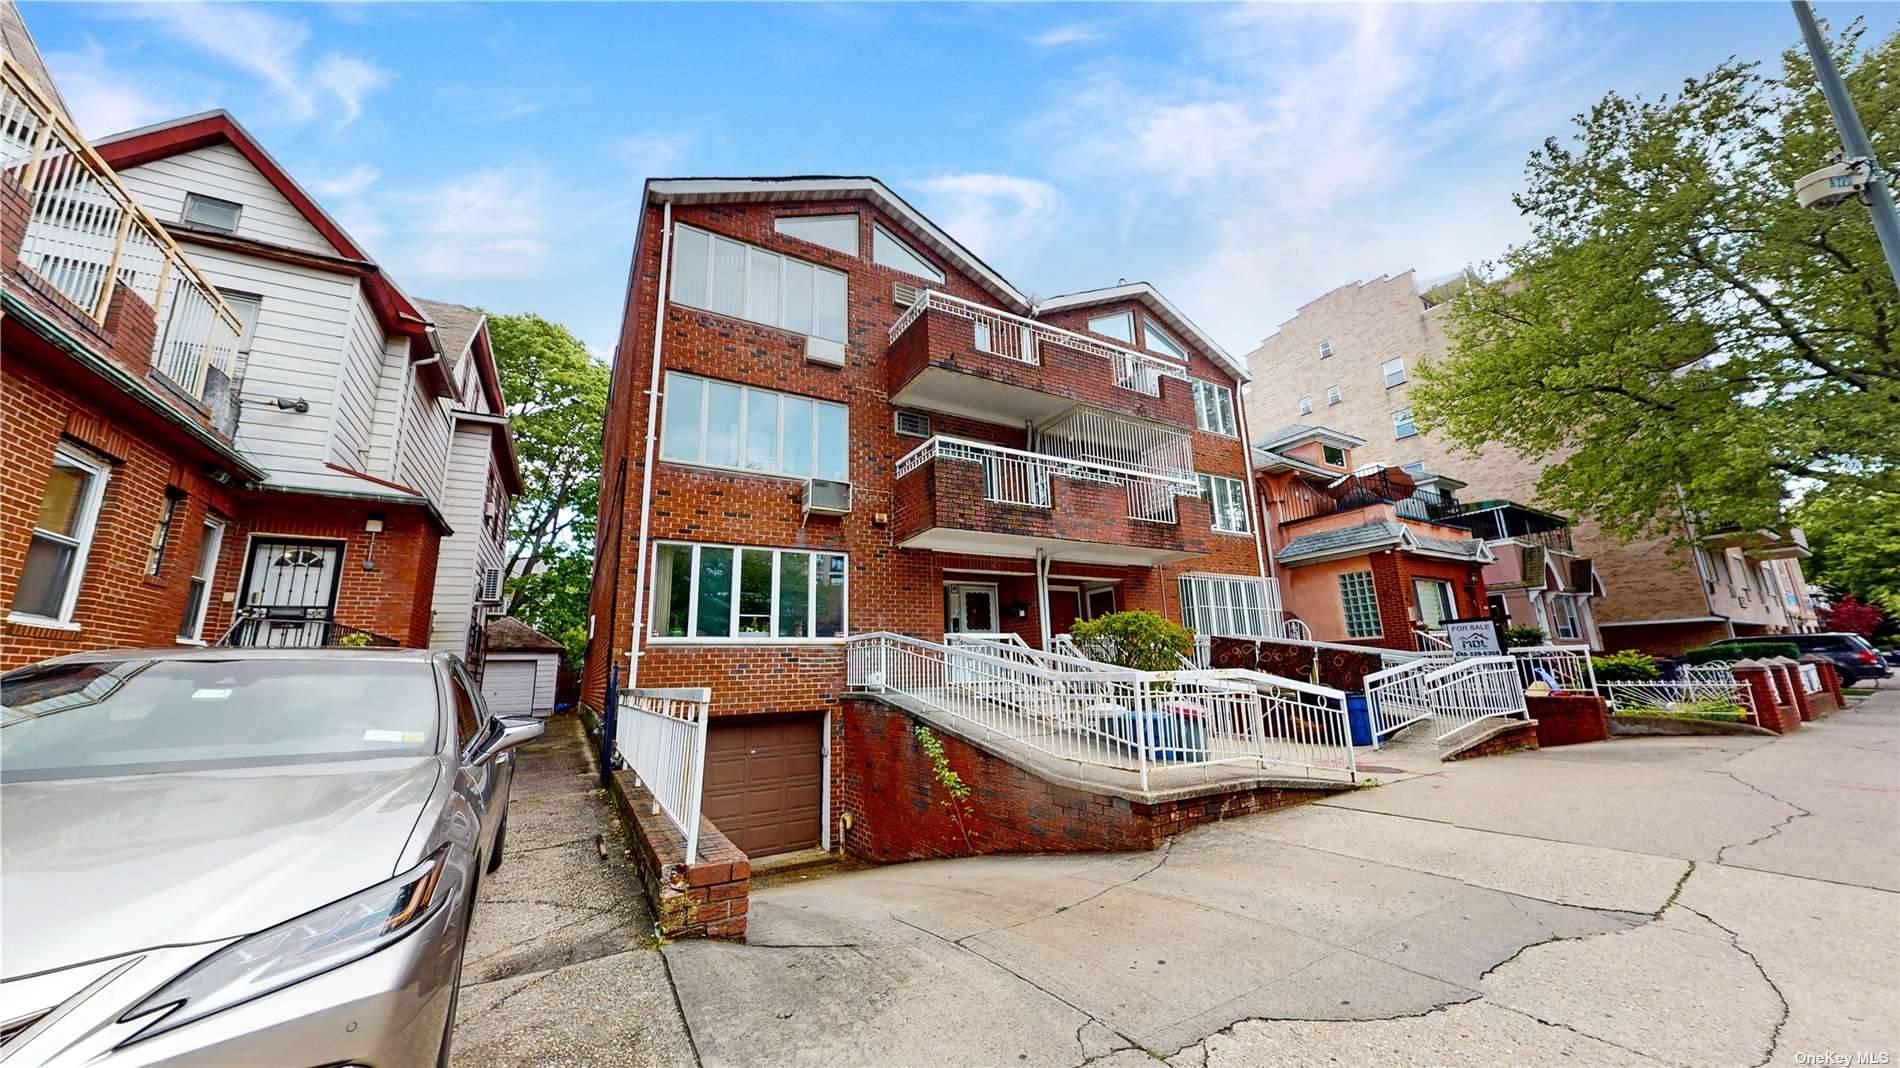 Welcome to this Humongous, Extra Large Duplex 4 Bedroom Condo, located in Midwood Brooklyn !